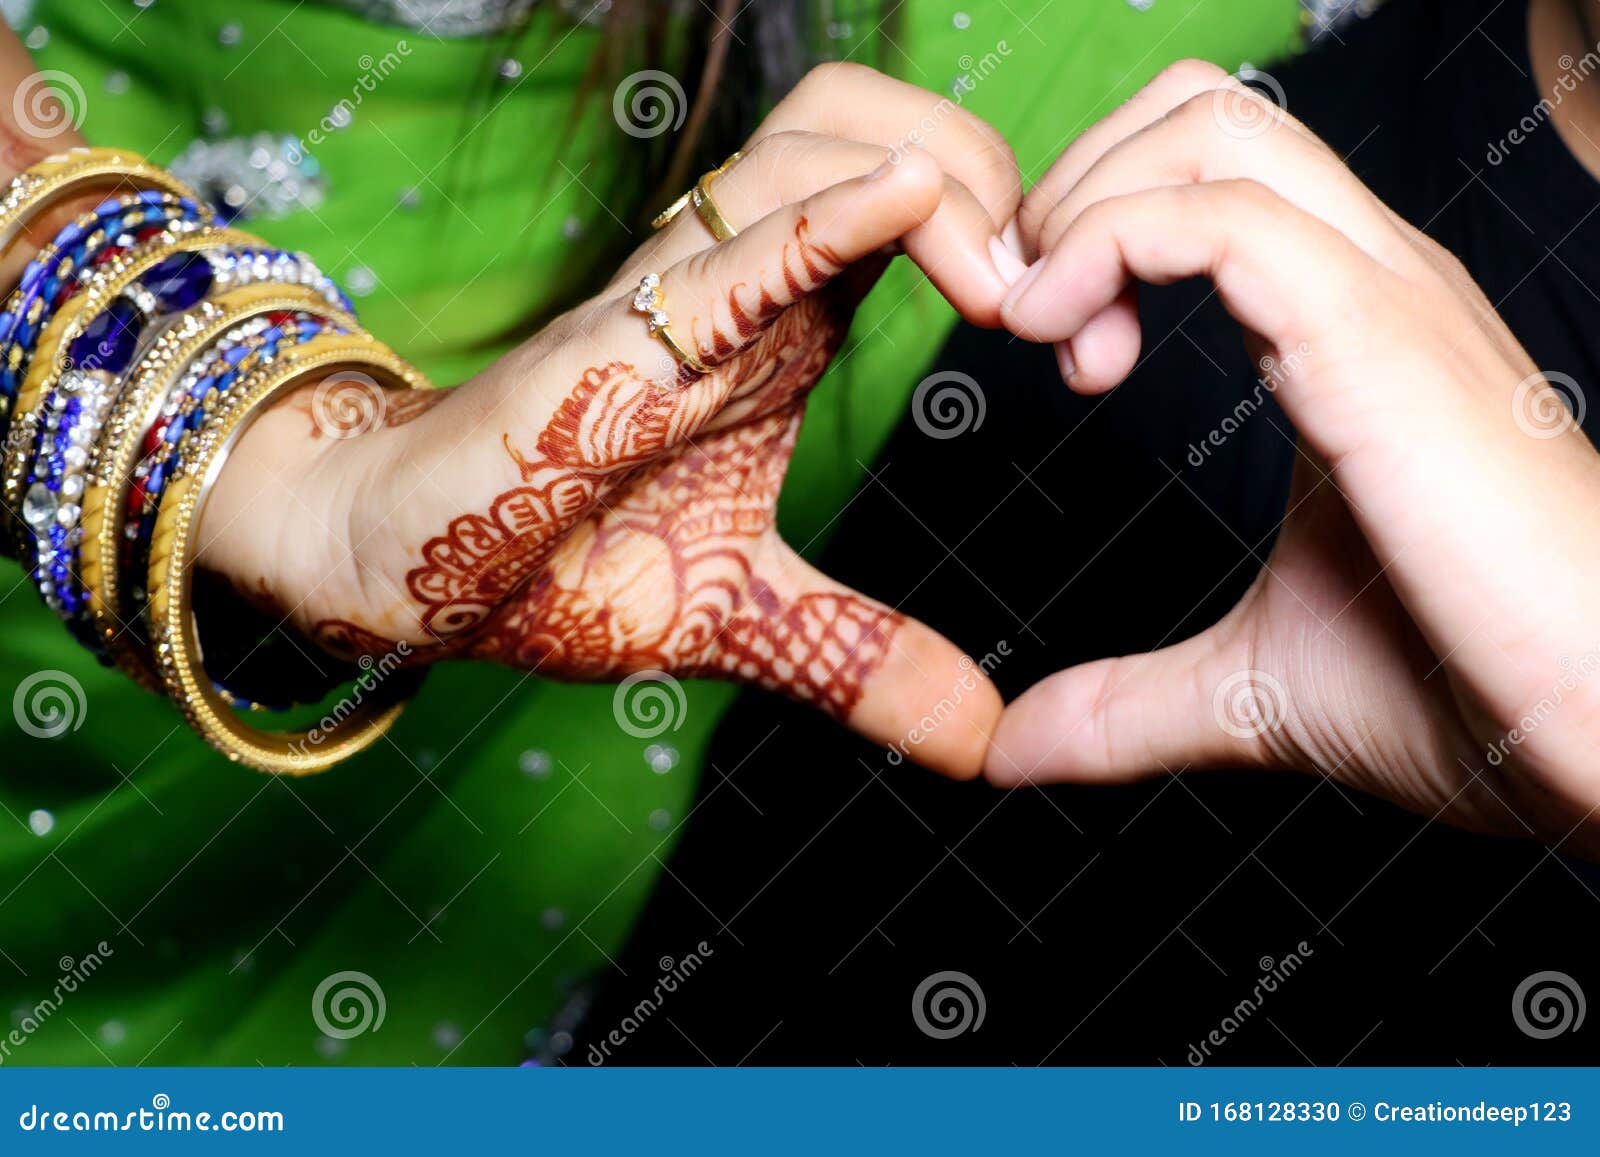 1 178 Indian Couple Holding Hands Photos Free Royalty Free Stock Photos From Dreamstime